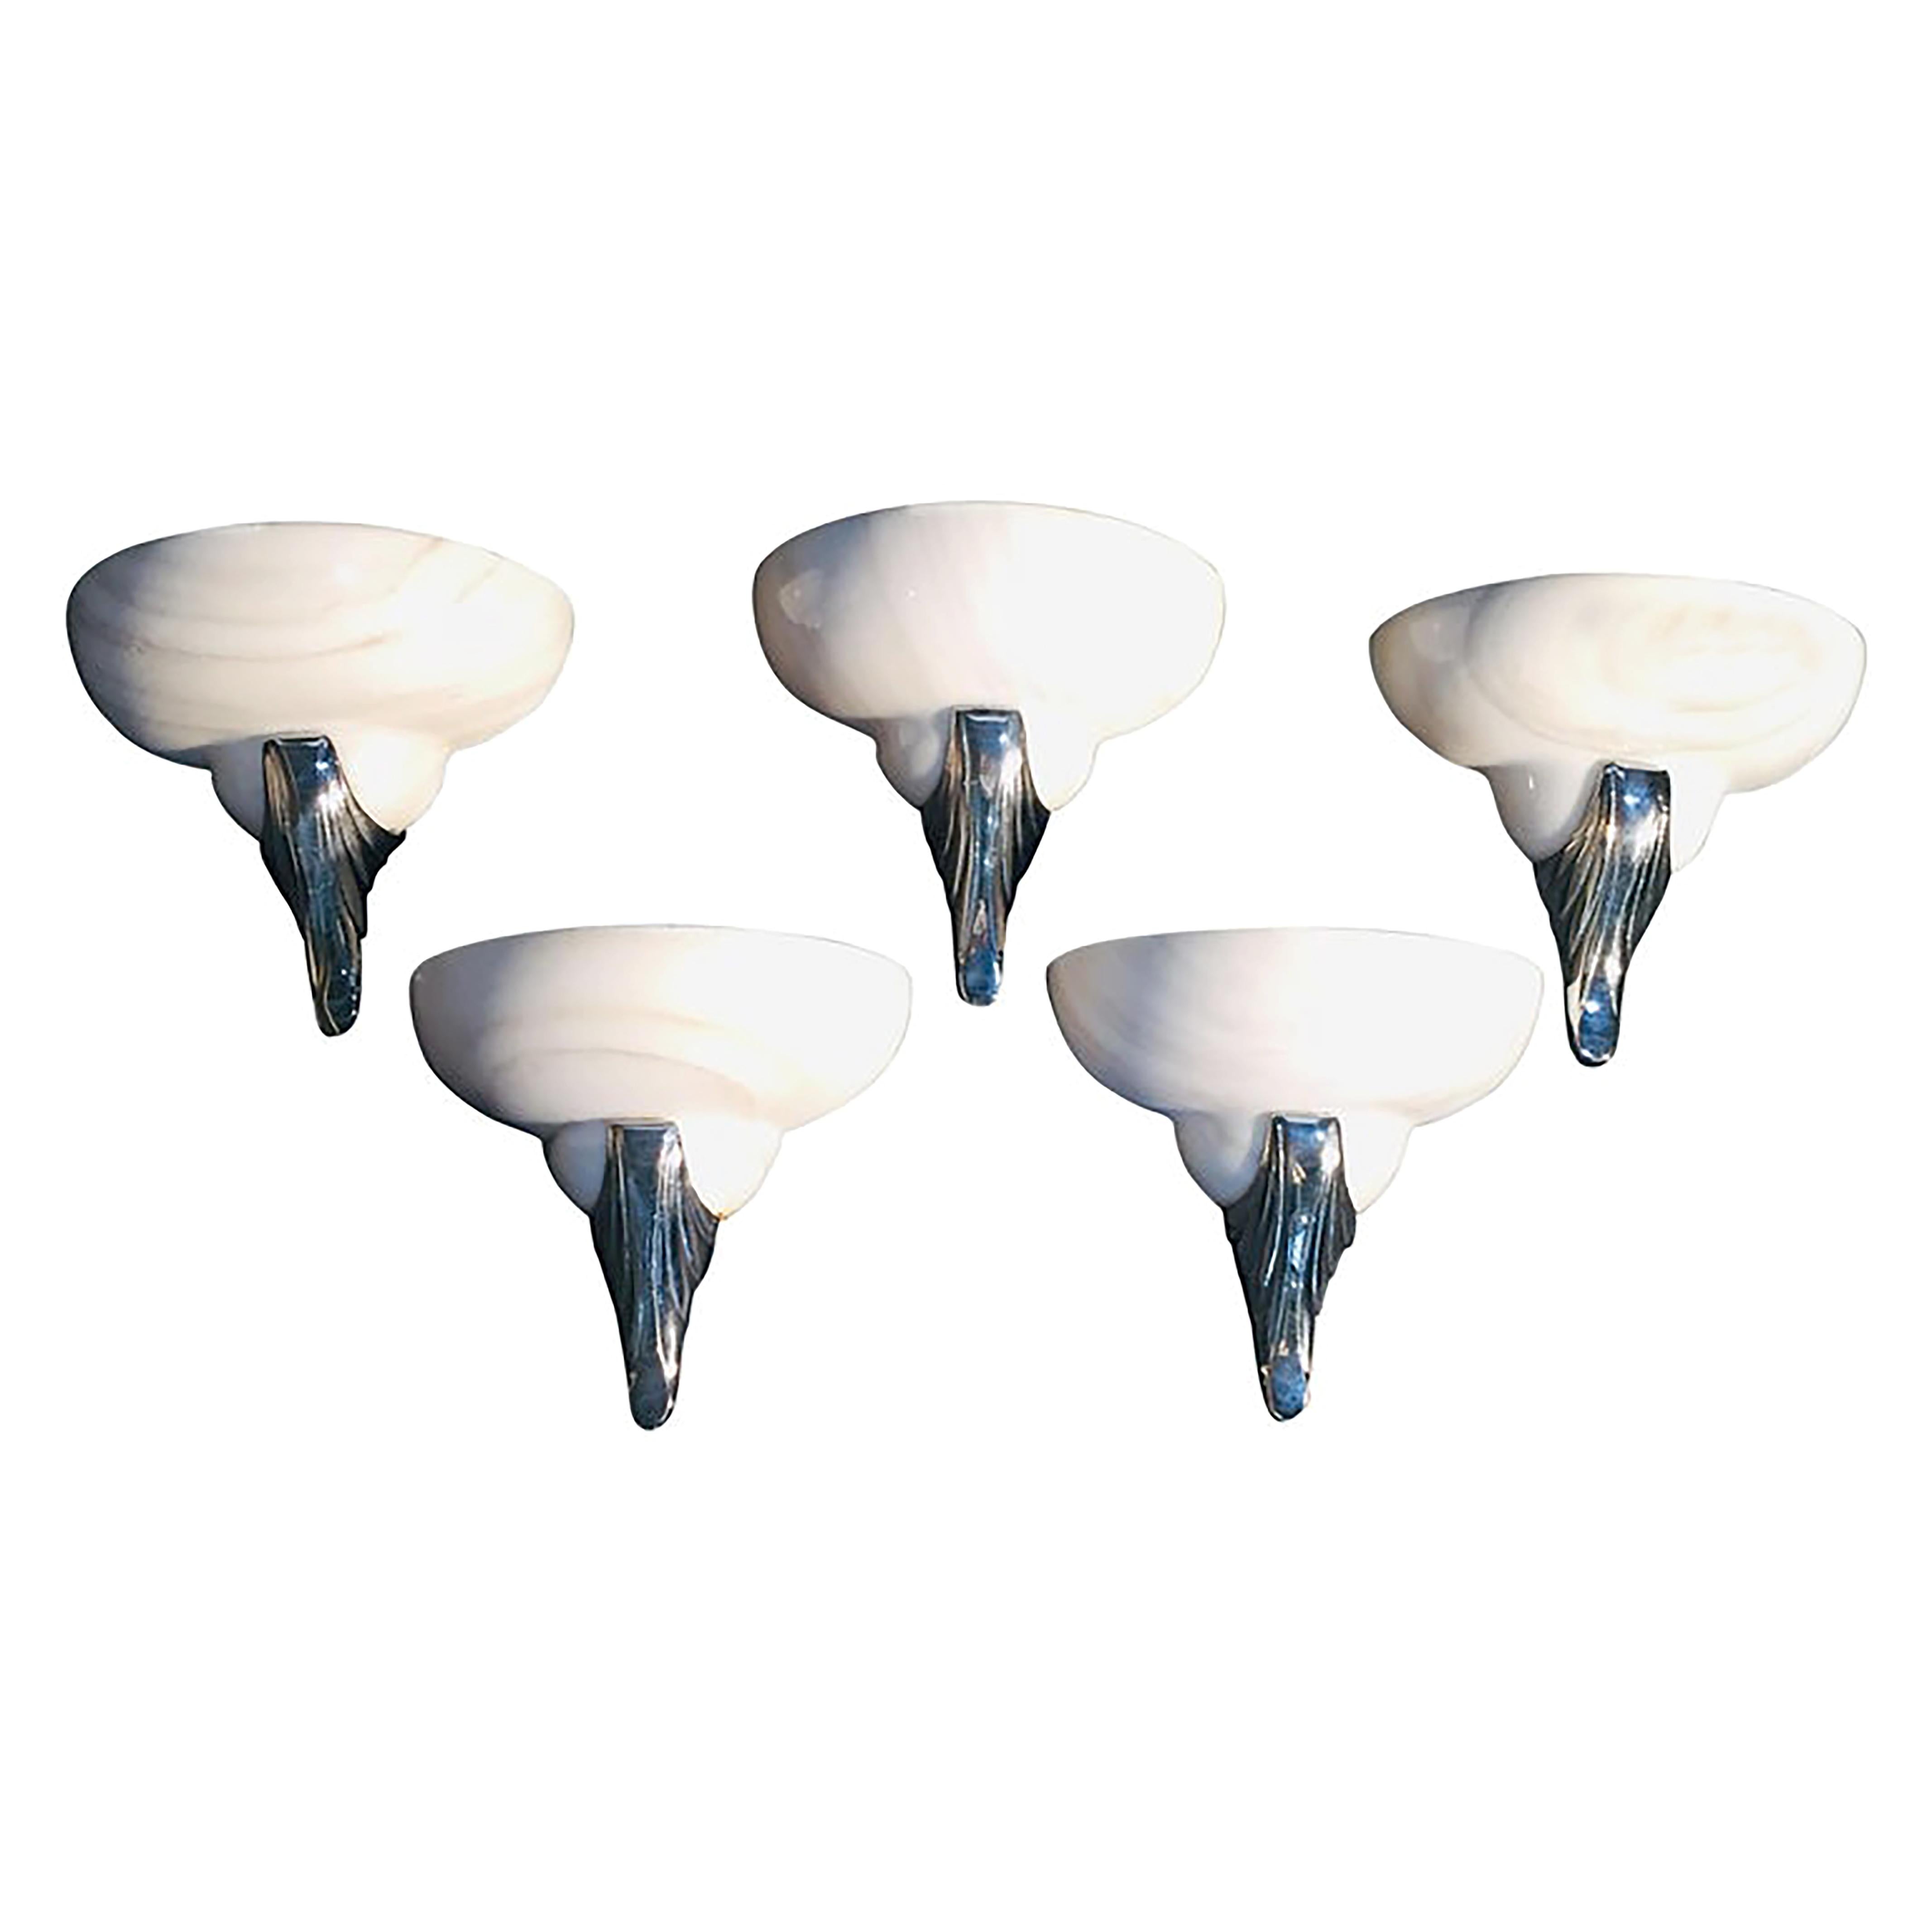 Set of five Art Deco sconces made of polished and chrome-plated support with a white alabaster shade.
Wired for the US. Exquisite light.
Set can be split.